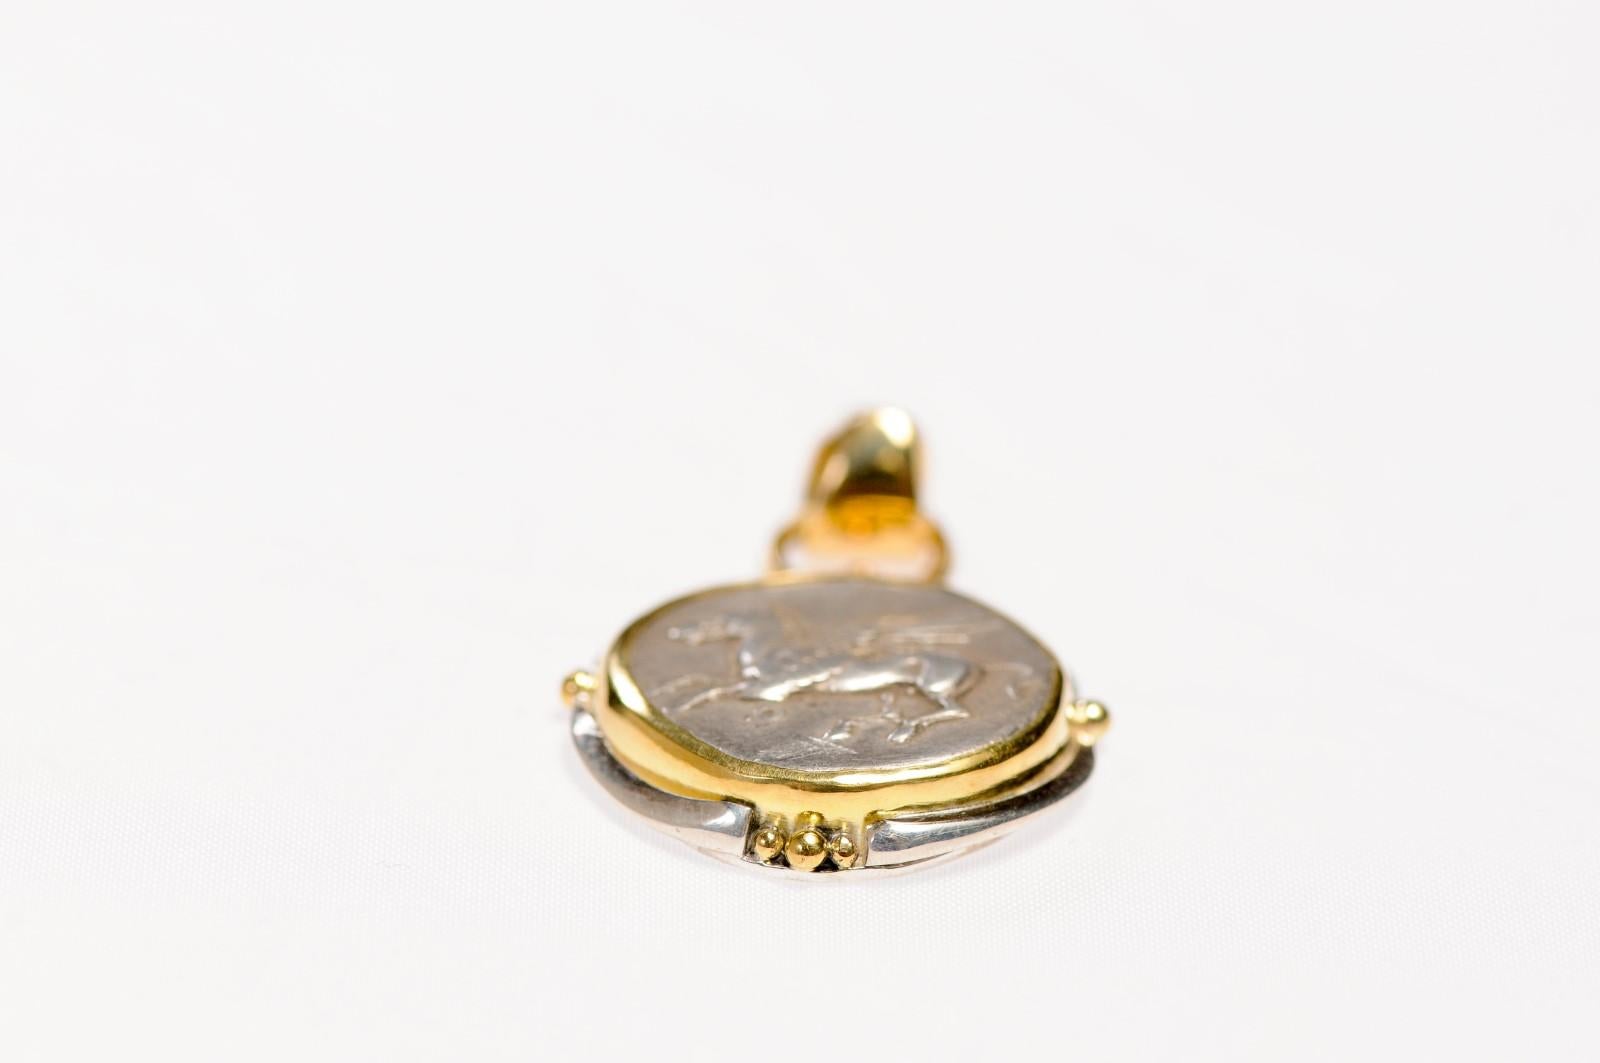 Ancient Pegasus Coin in 22 kt Gold Pendant (pendant only) For Sale 4